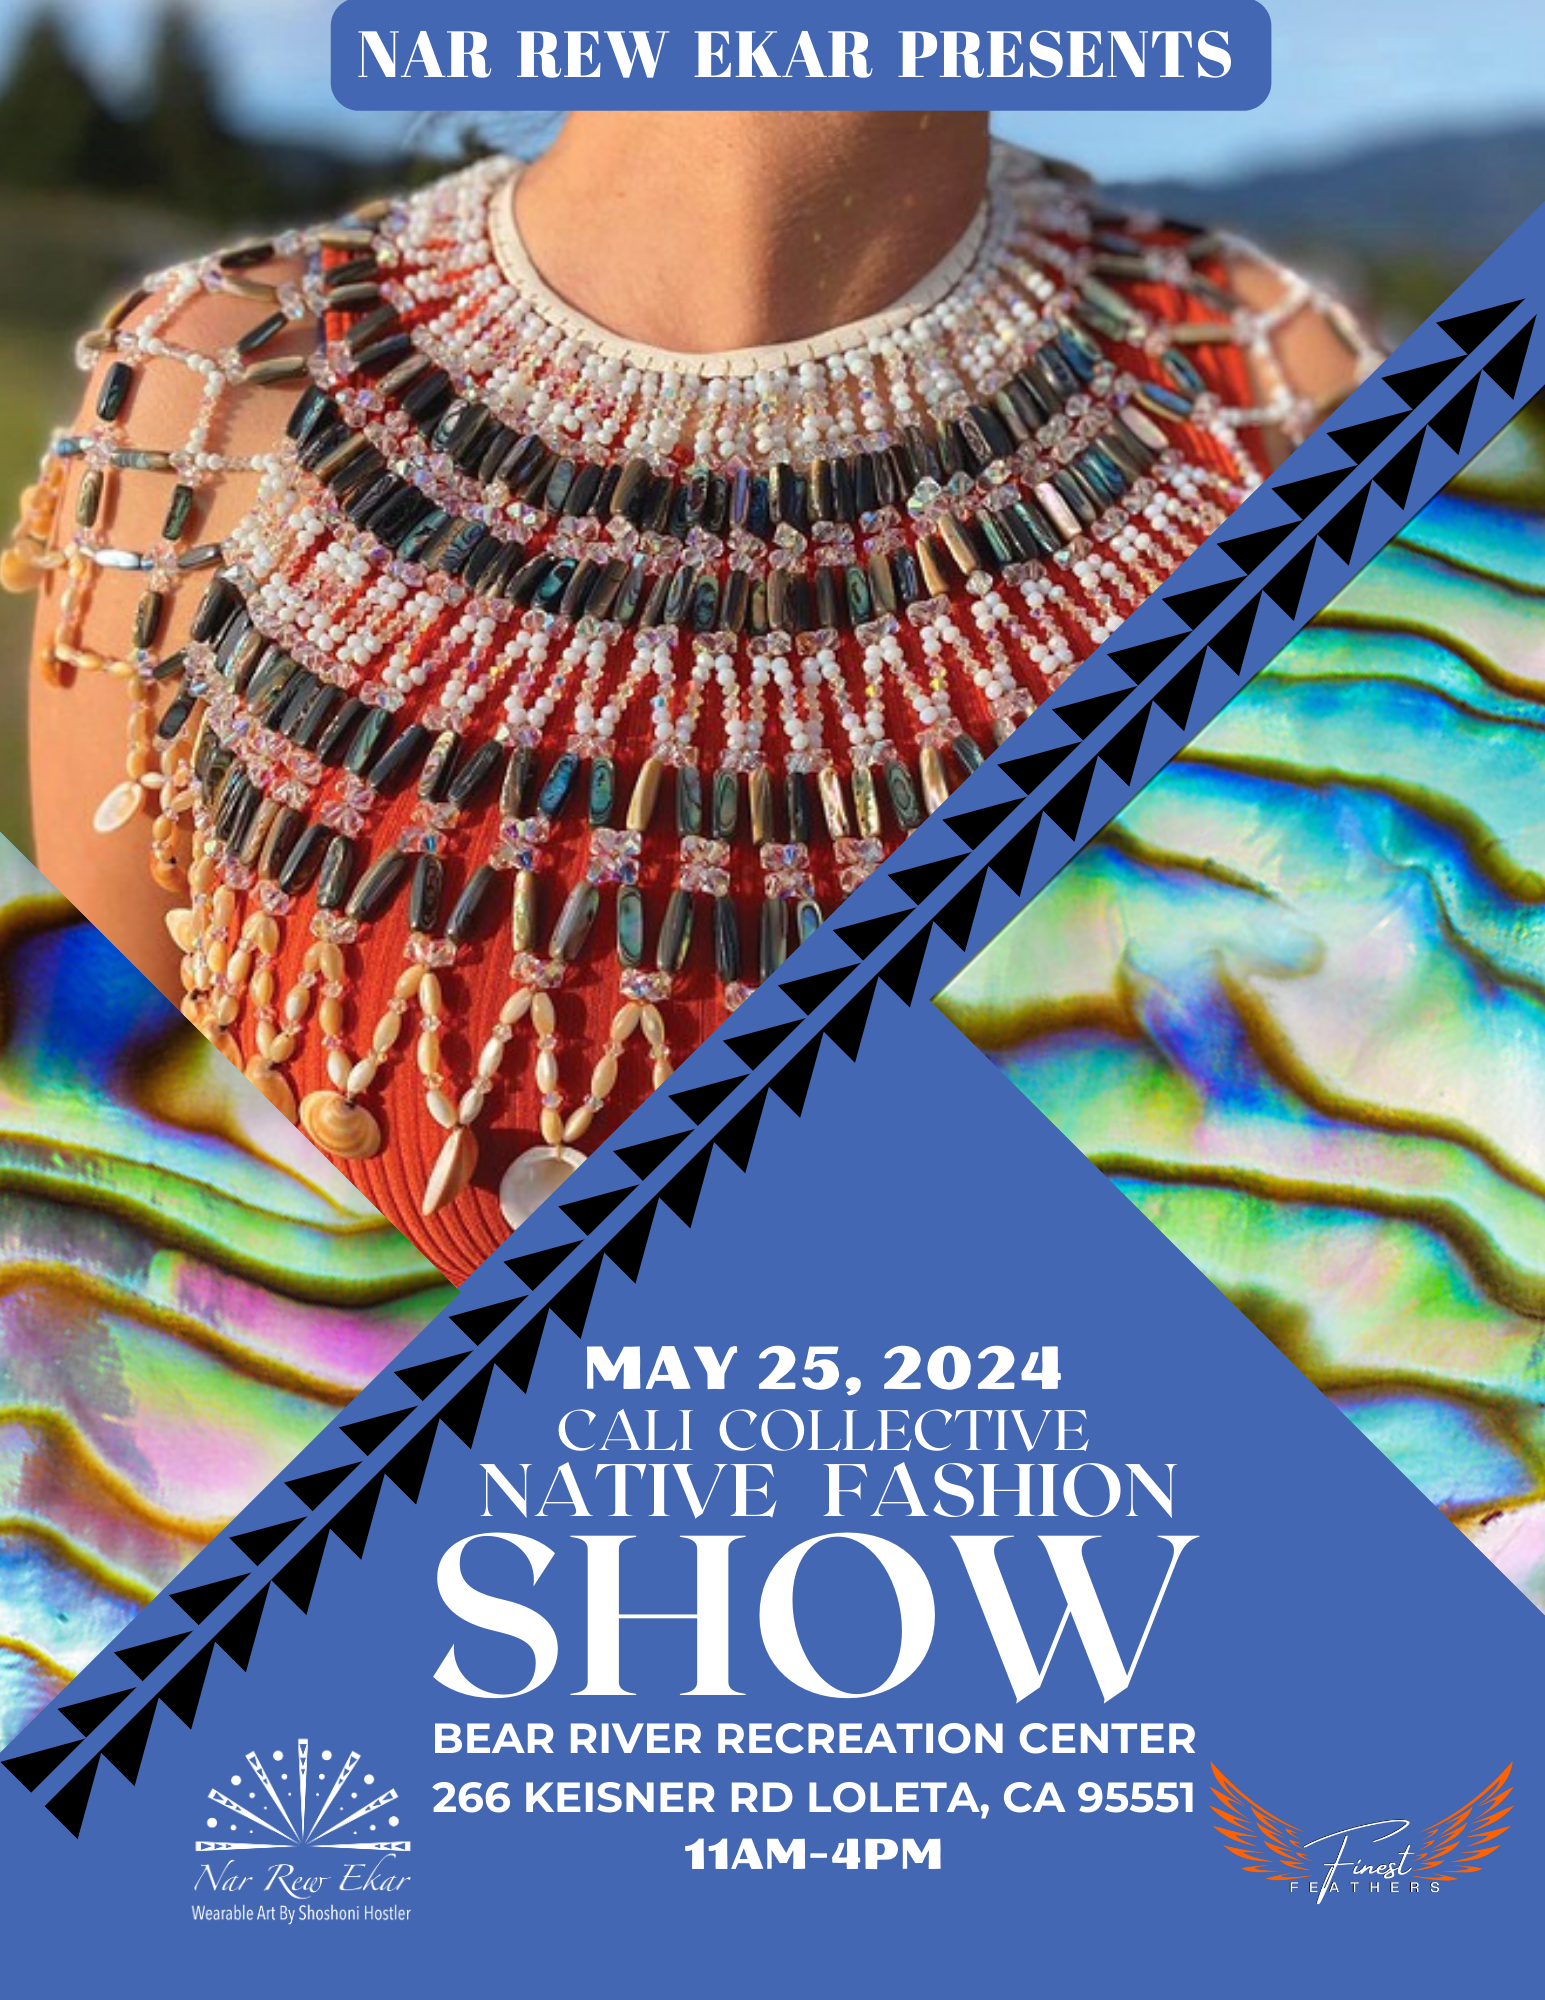 A large beaded necklace with various bead shapes and sizes as well as shells, which drapes over the chest and shoulders of a model. May 25, 2024. Nar Rew Ekar Presents Cali Collective Native Fashion Show. Bear River Recreation Center, 266 Keisner Rd, Loleta, CA 95551. 11AM - 4PM. Logos for Nar Rew Ekar, Wearable Art By Shoshoni Hostler and Finest Feathers.